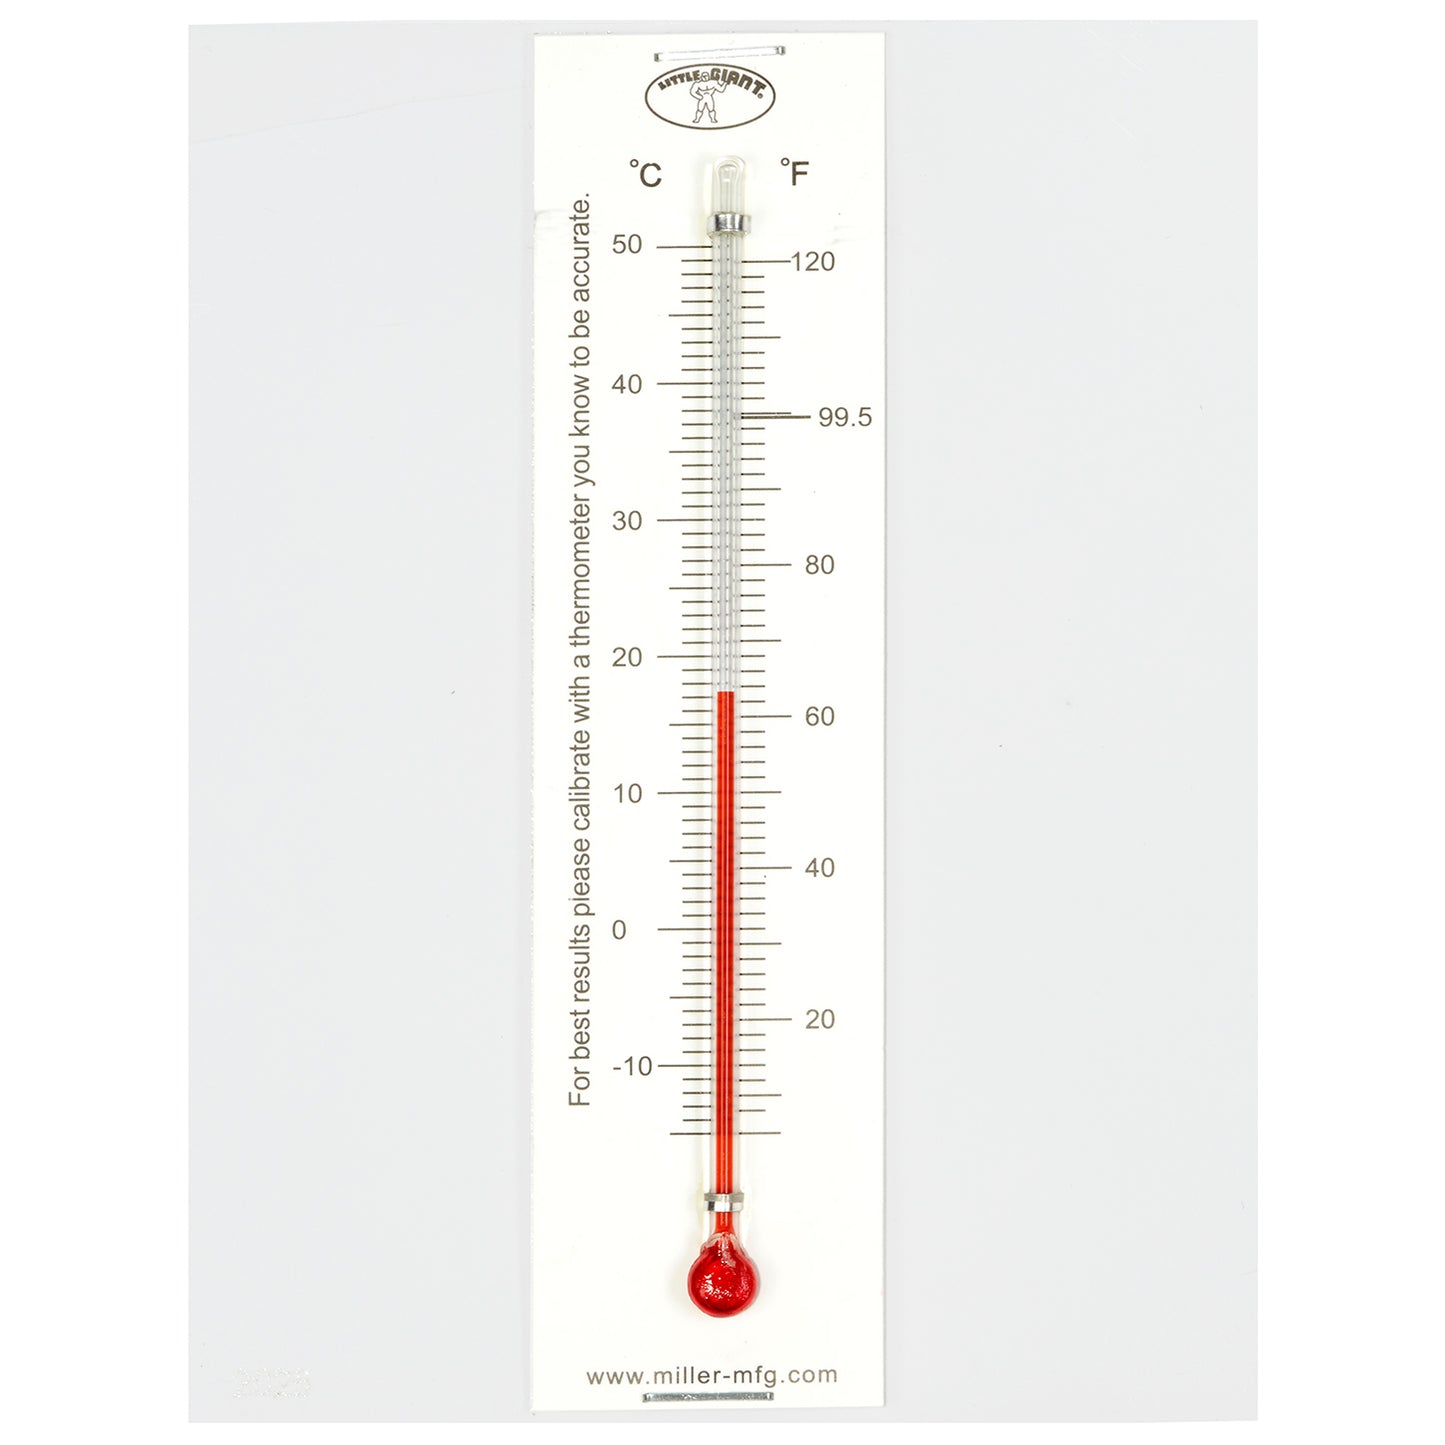 Little Giant® Incubation Thermometer